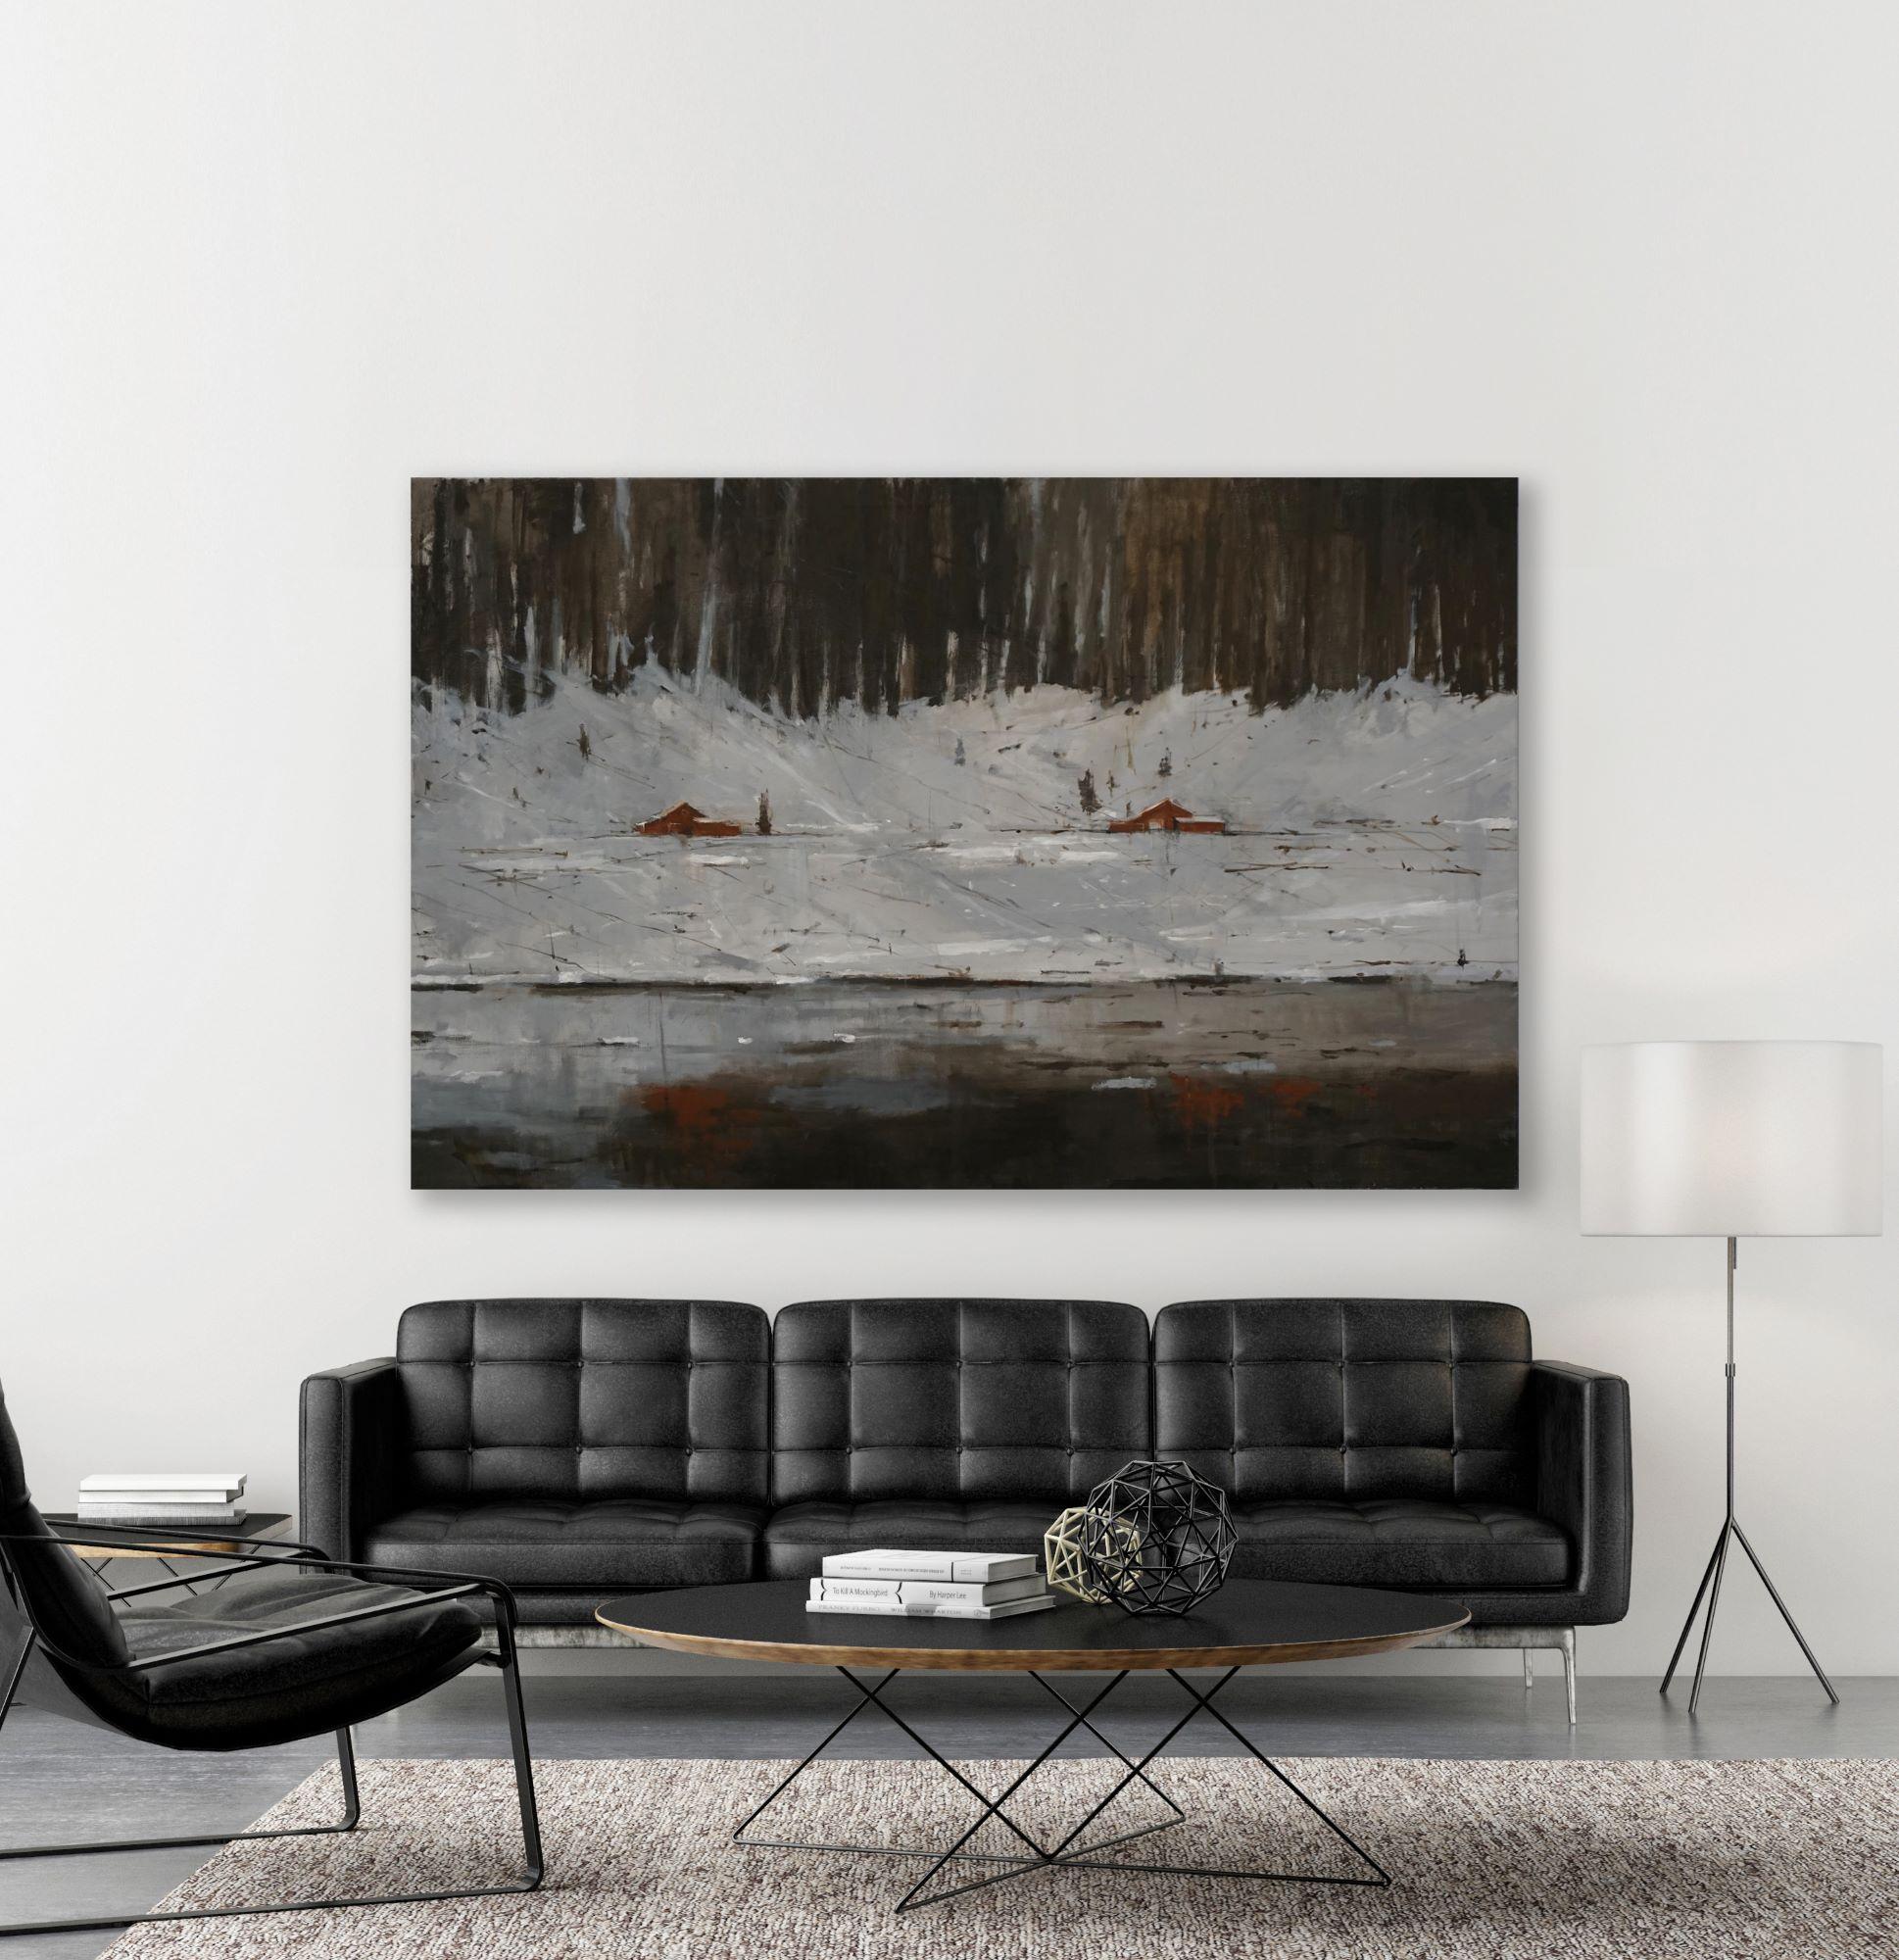 Red Houses in Nord-Norge by Calo Carratala - Snowy landscape painting, forest - Painting by Calo Carratalá